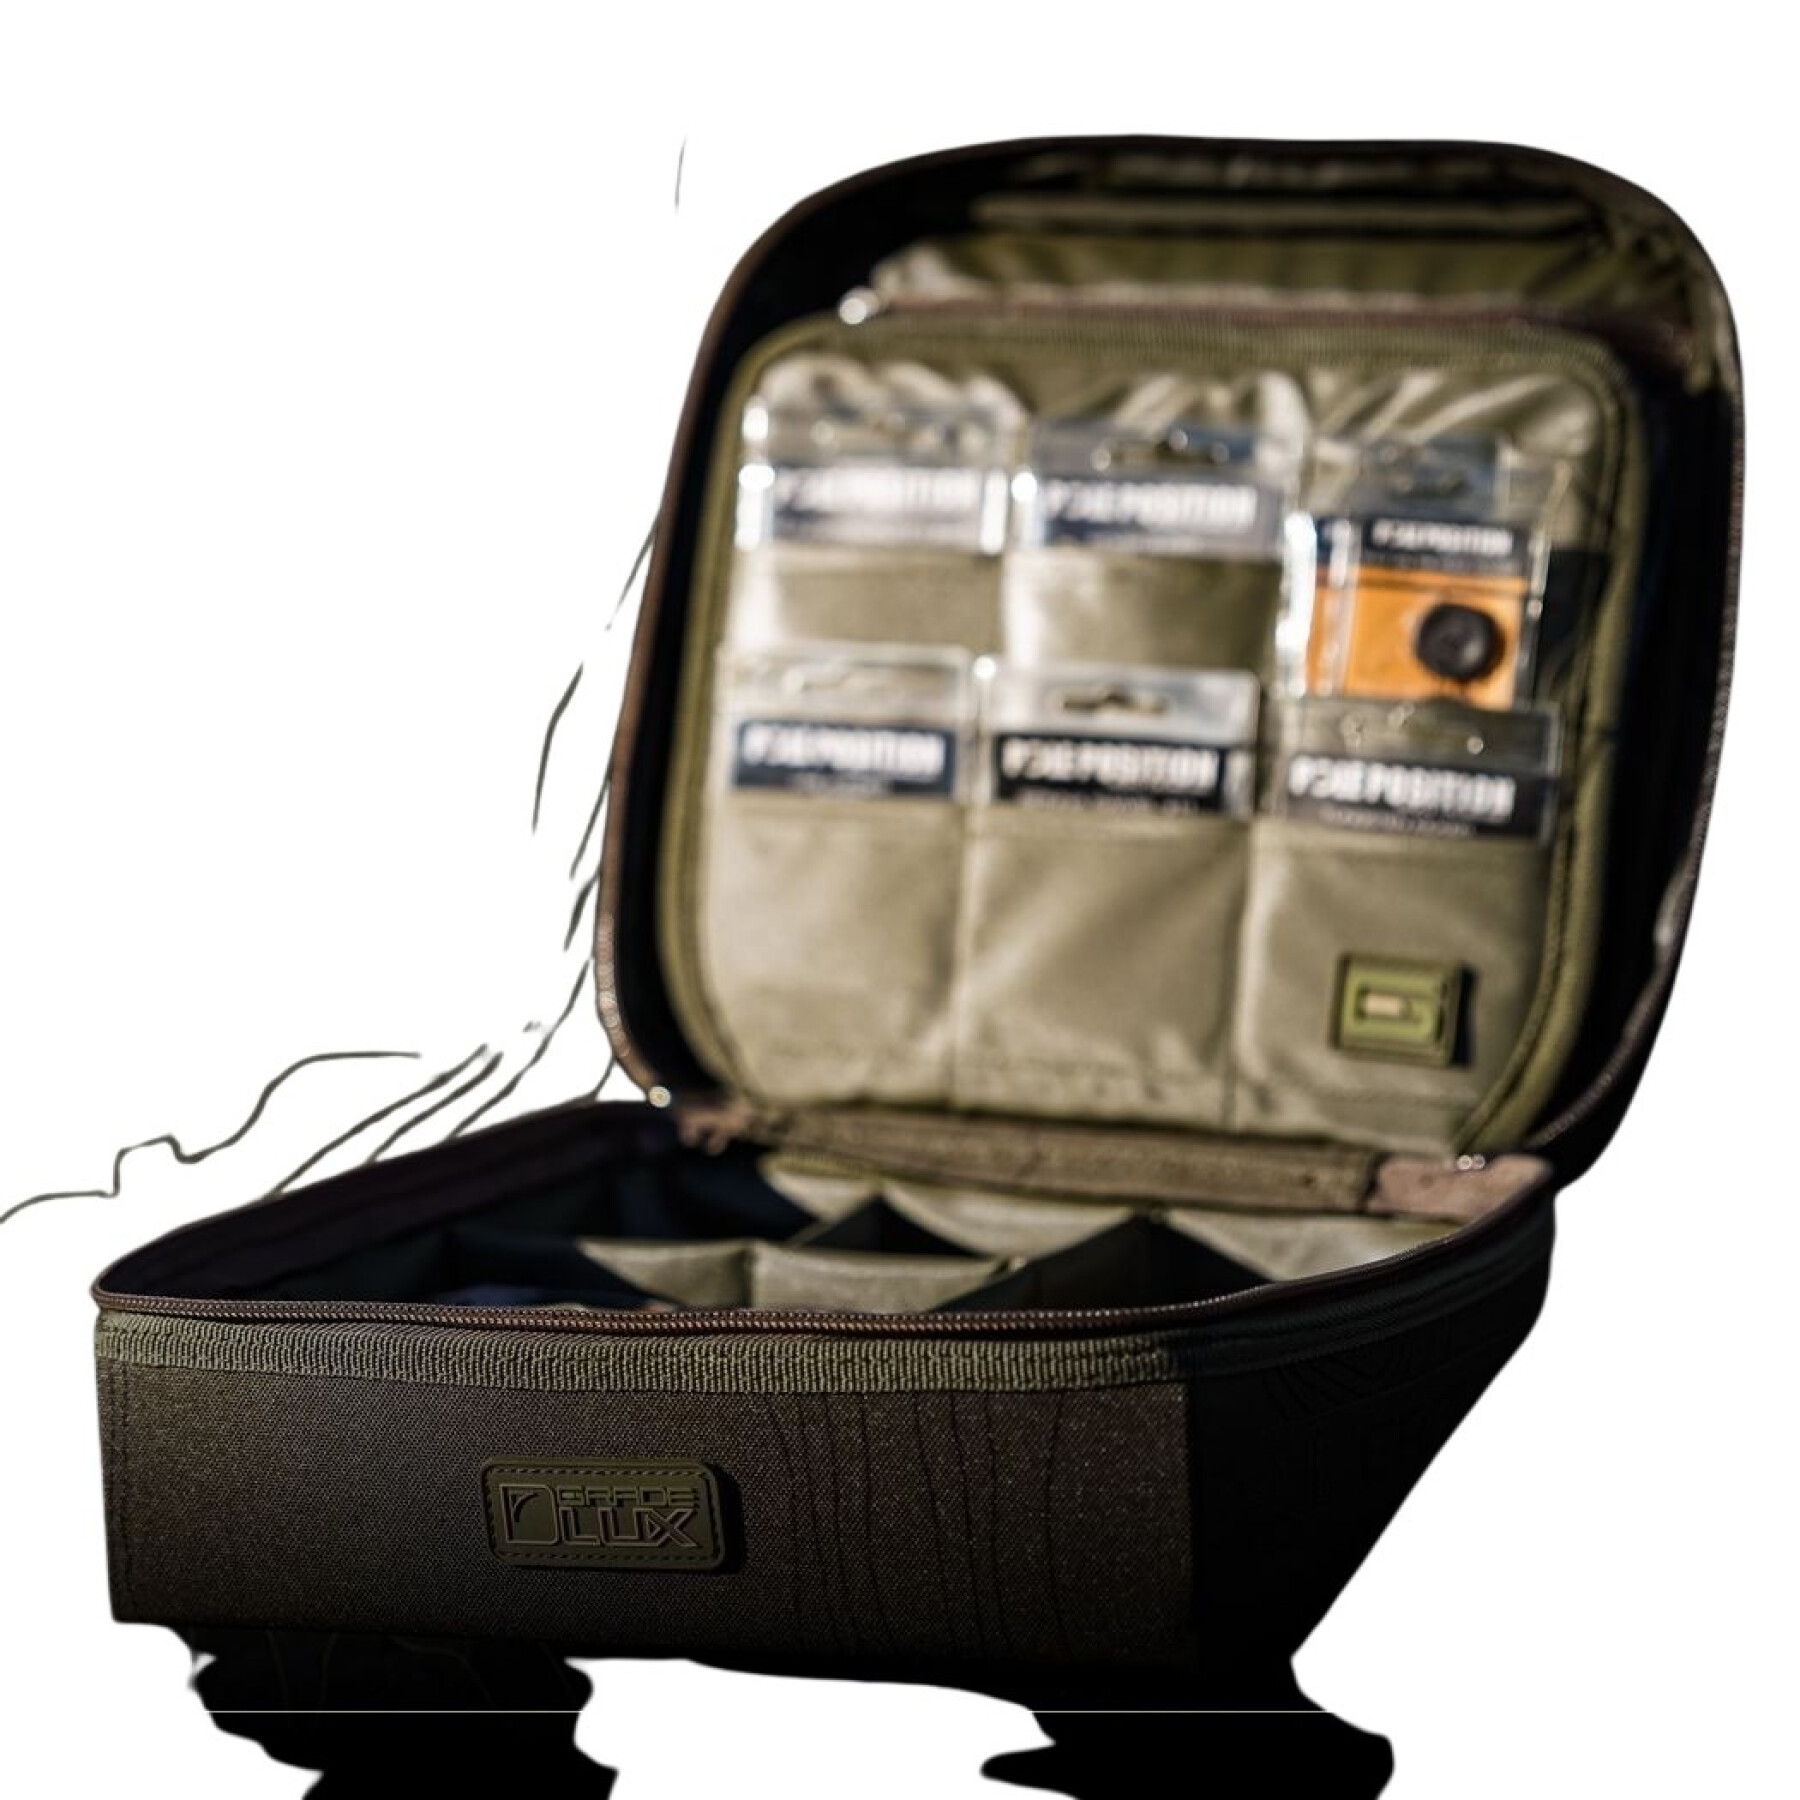 Fishing bag Spro D-Lux